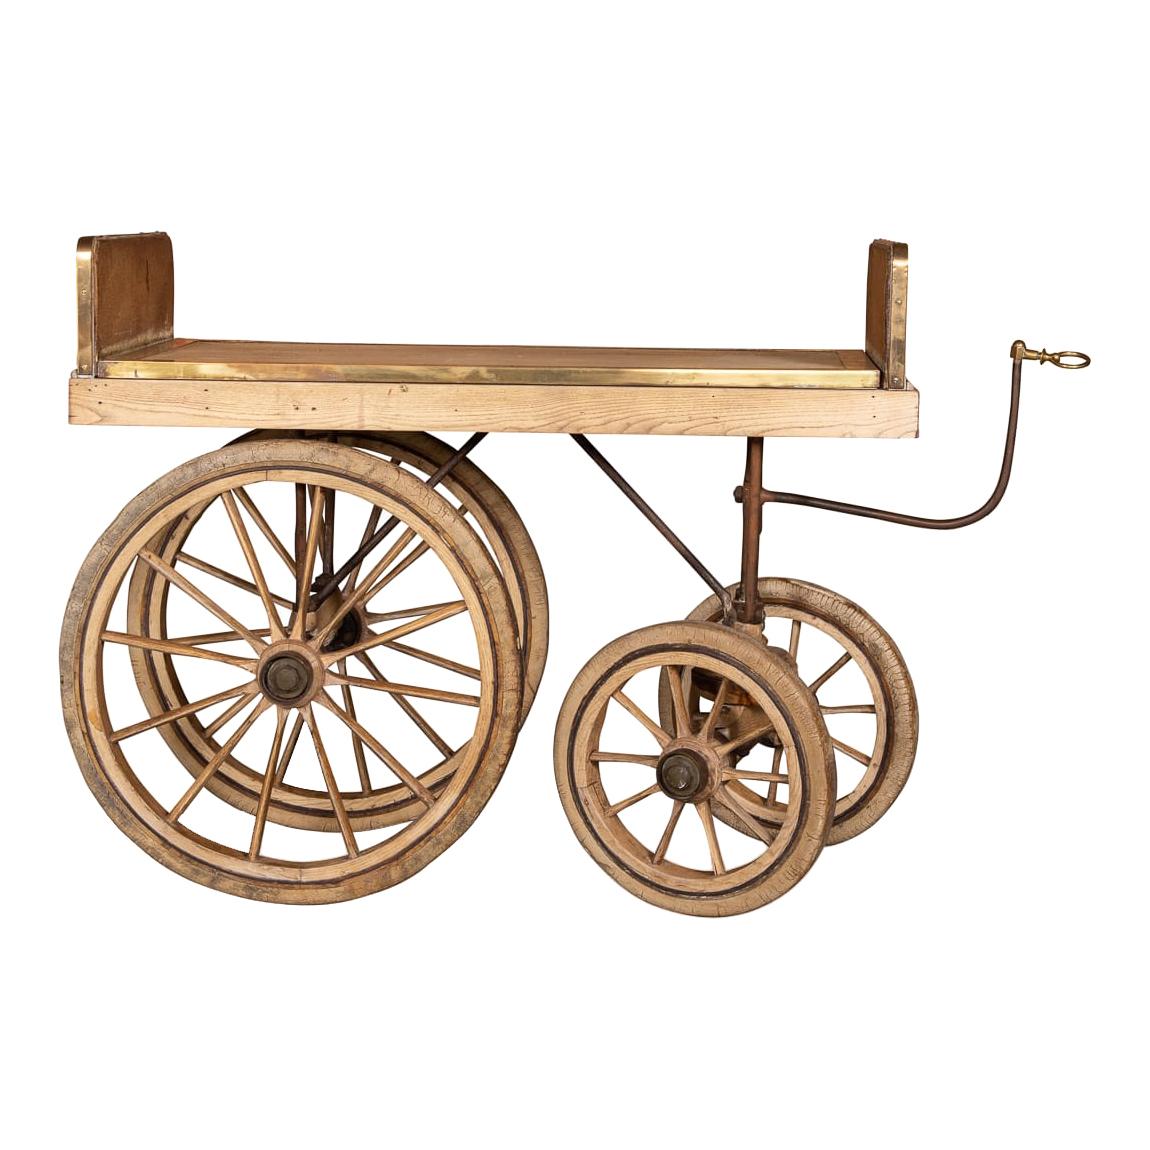 20th Century French Handcrafted Wooden Patisserie Cart, circa 1900